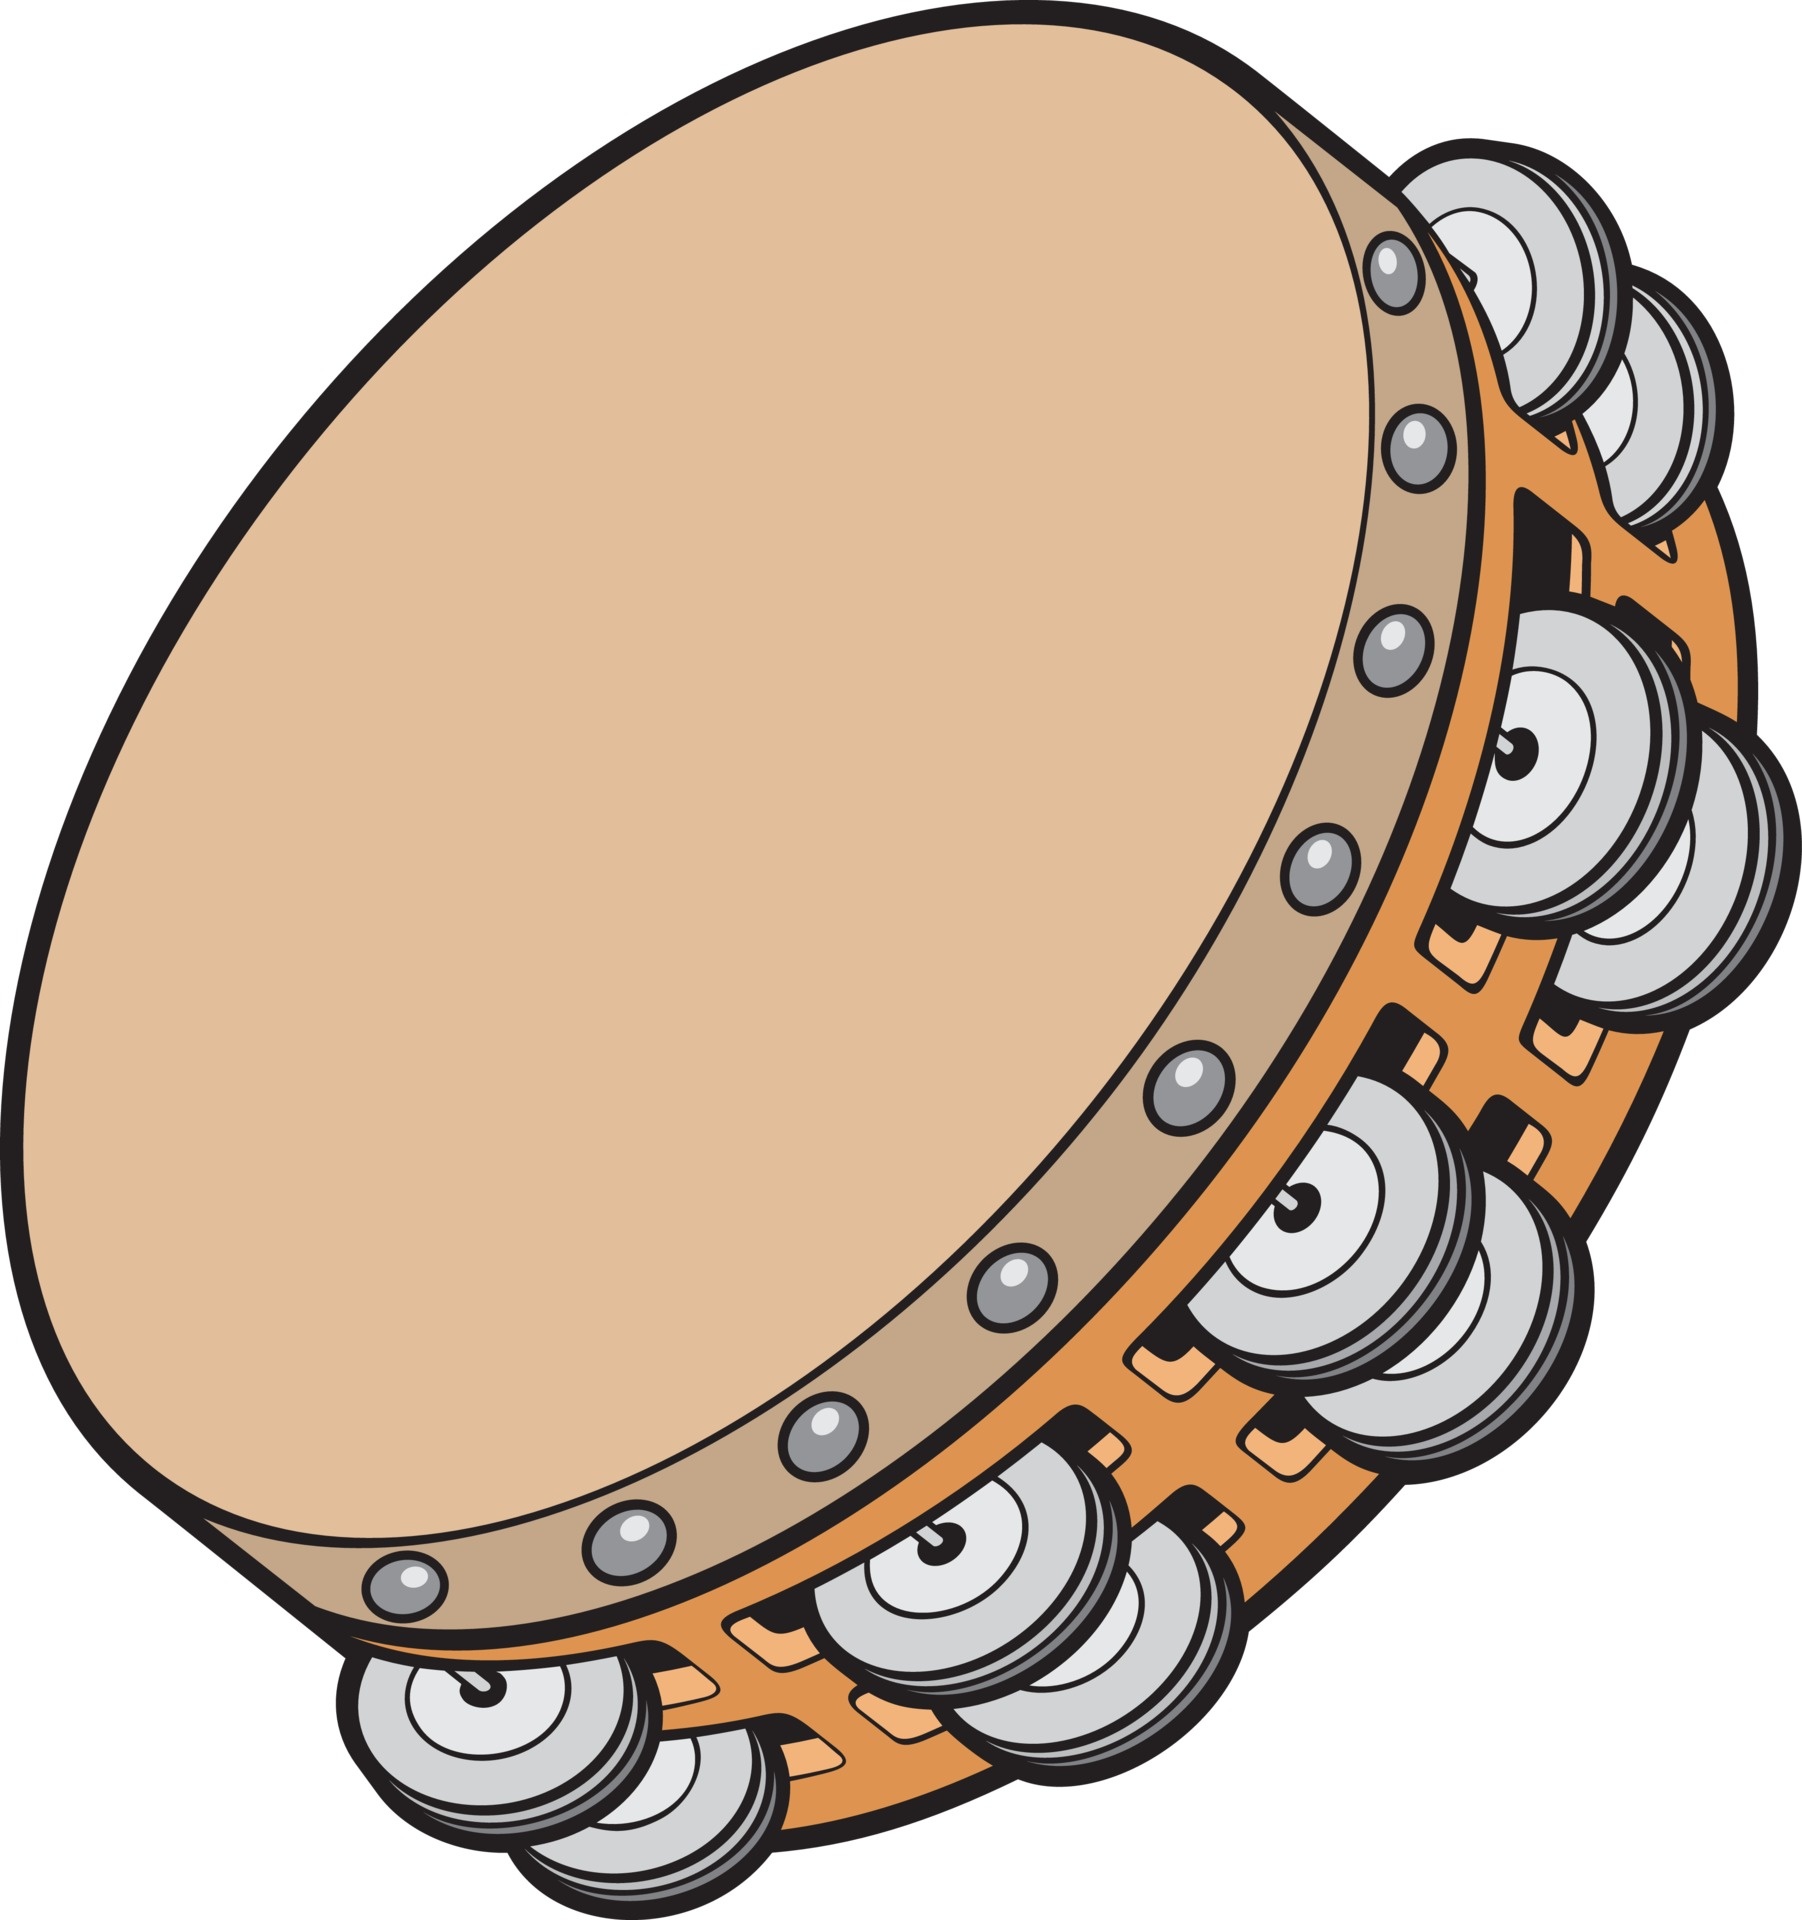 Tambourine: Hand Drum In Vector Art, A Stylized Vision Of A Folk Music Instrument. 1810x1920 HD Wallpaper.